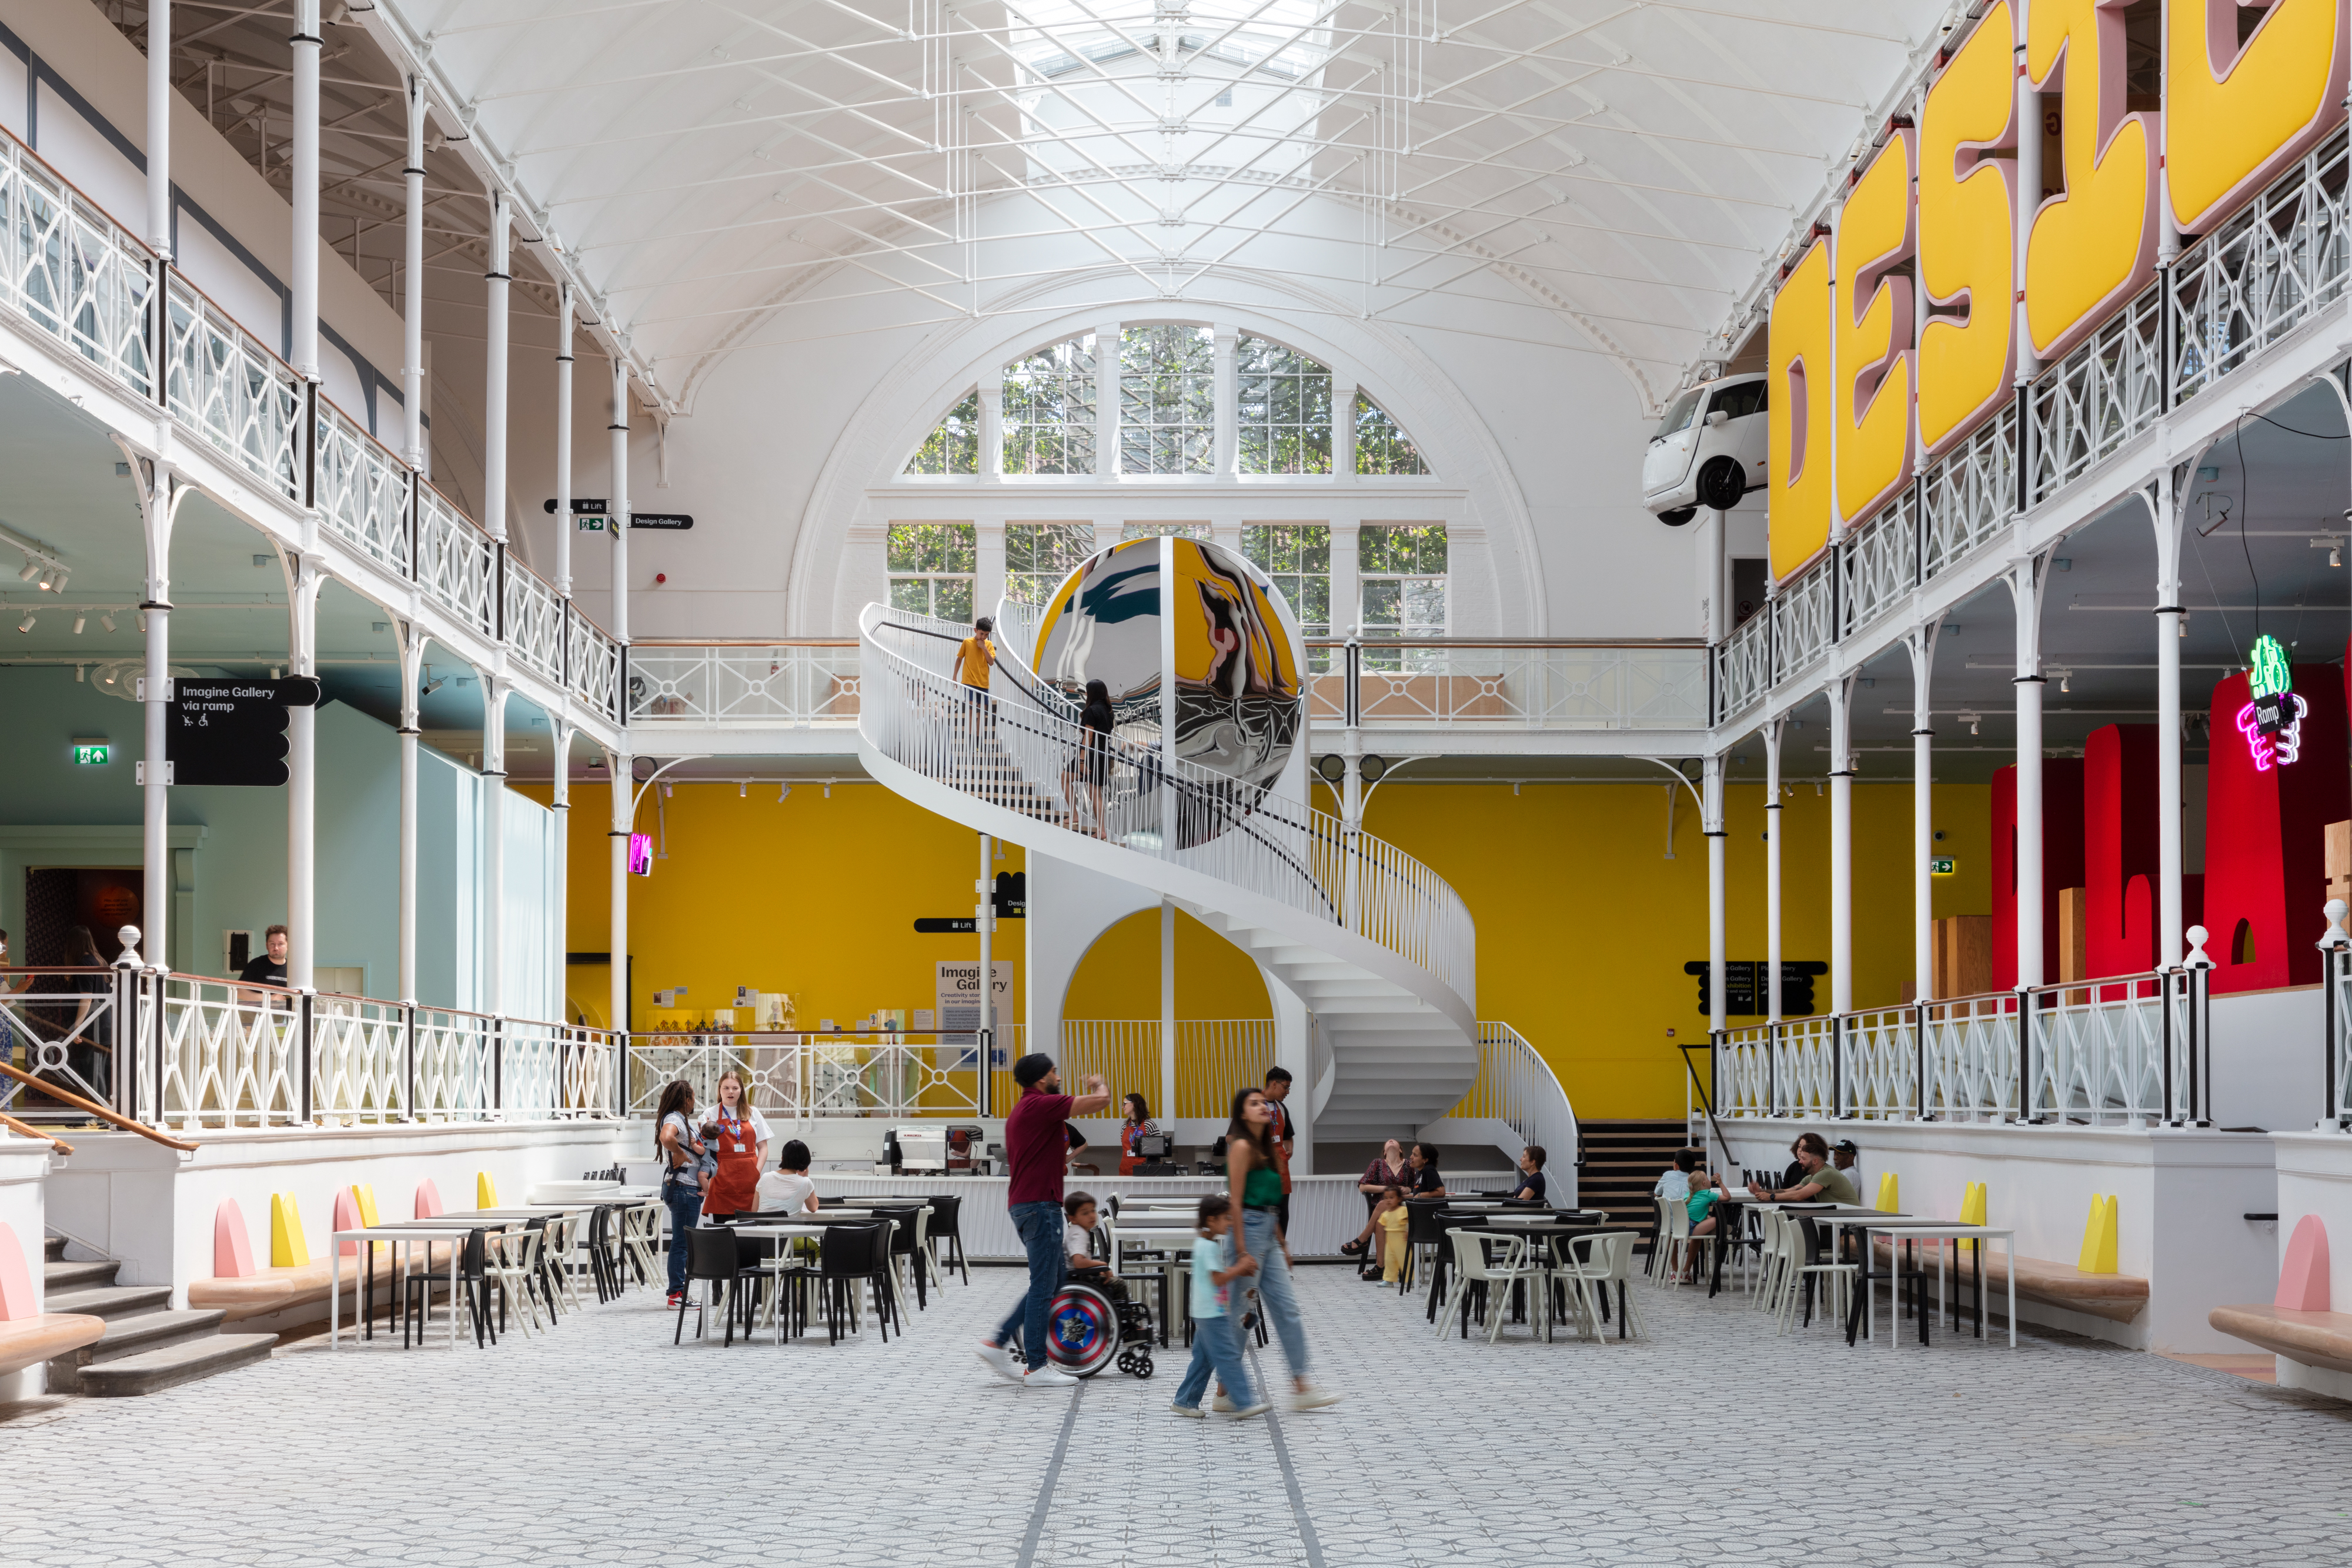 Inside the entrance of the Young V&A museum with people at tables and a large central spiral staircase leading to a mezzanine floor and window